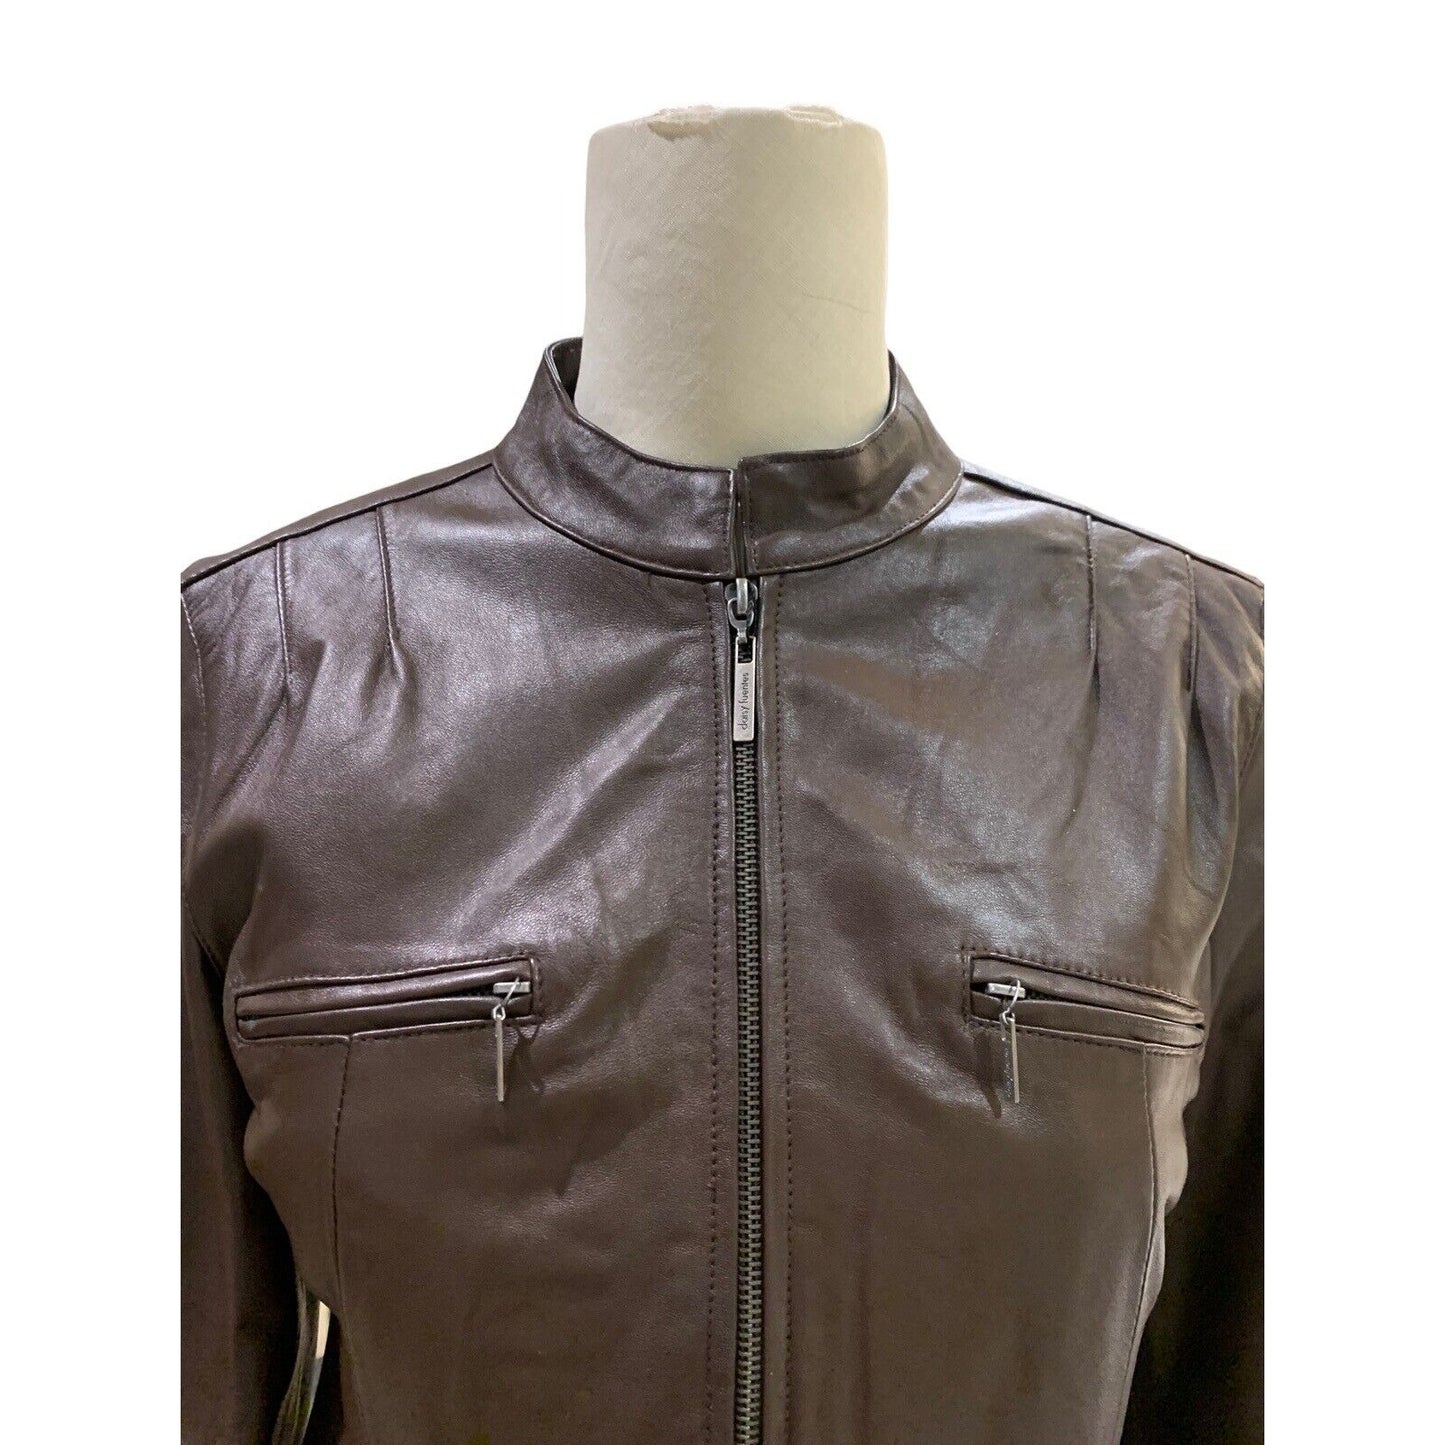 Women’s Leather Jacket With Pleated Peplum Details By Daisy Fuentes